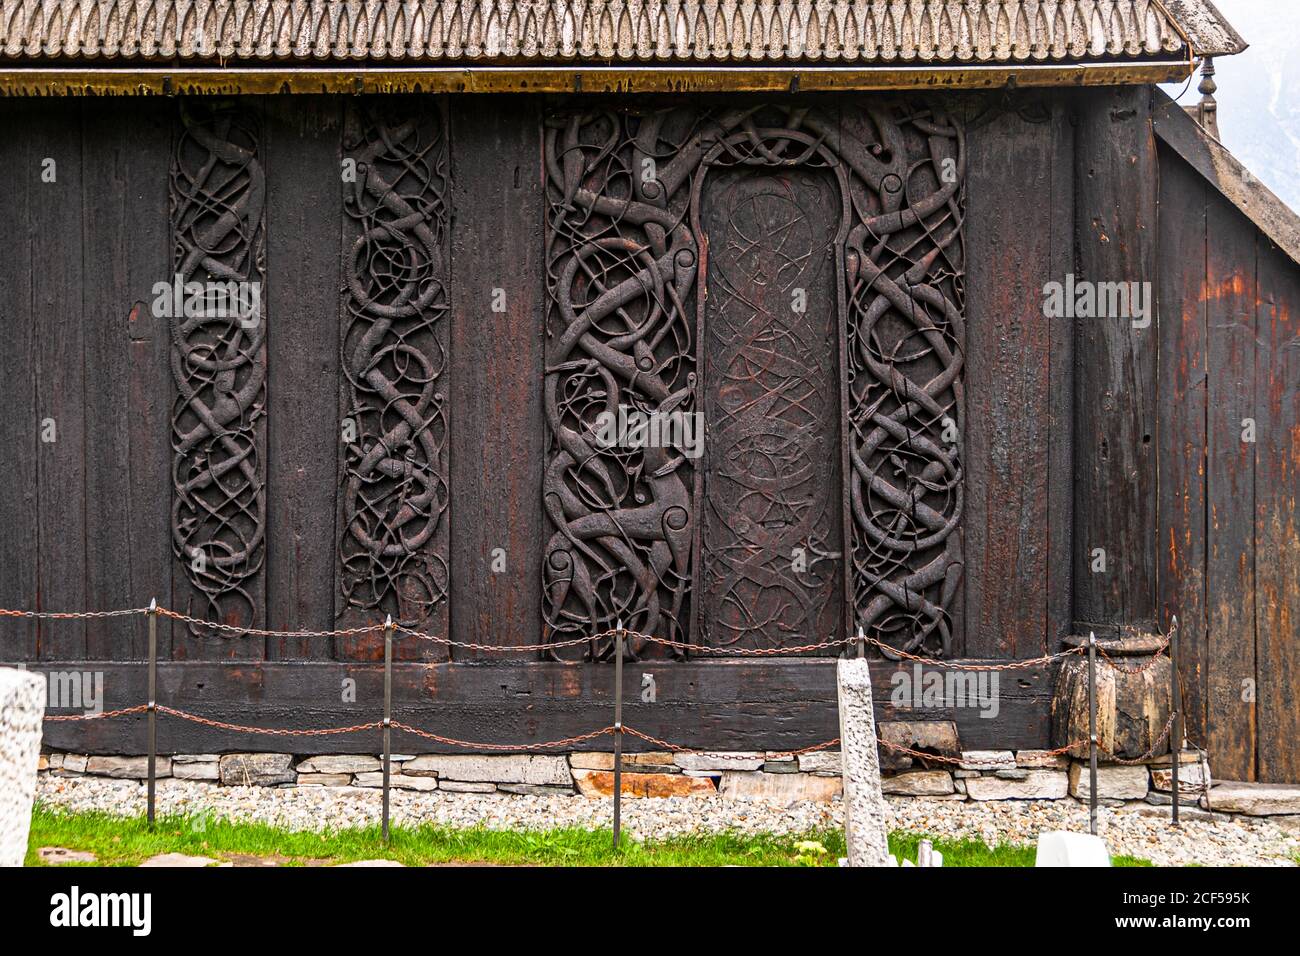 Stave Church Urnes in Luster, Norway. The north portal of the Urnes Stave Church in Luster, Norway is artistically carved after the motif of the world ash tree Yggdrasil. This is also one of the last examples of Viking animal ornamentation Stock Photo